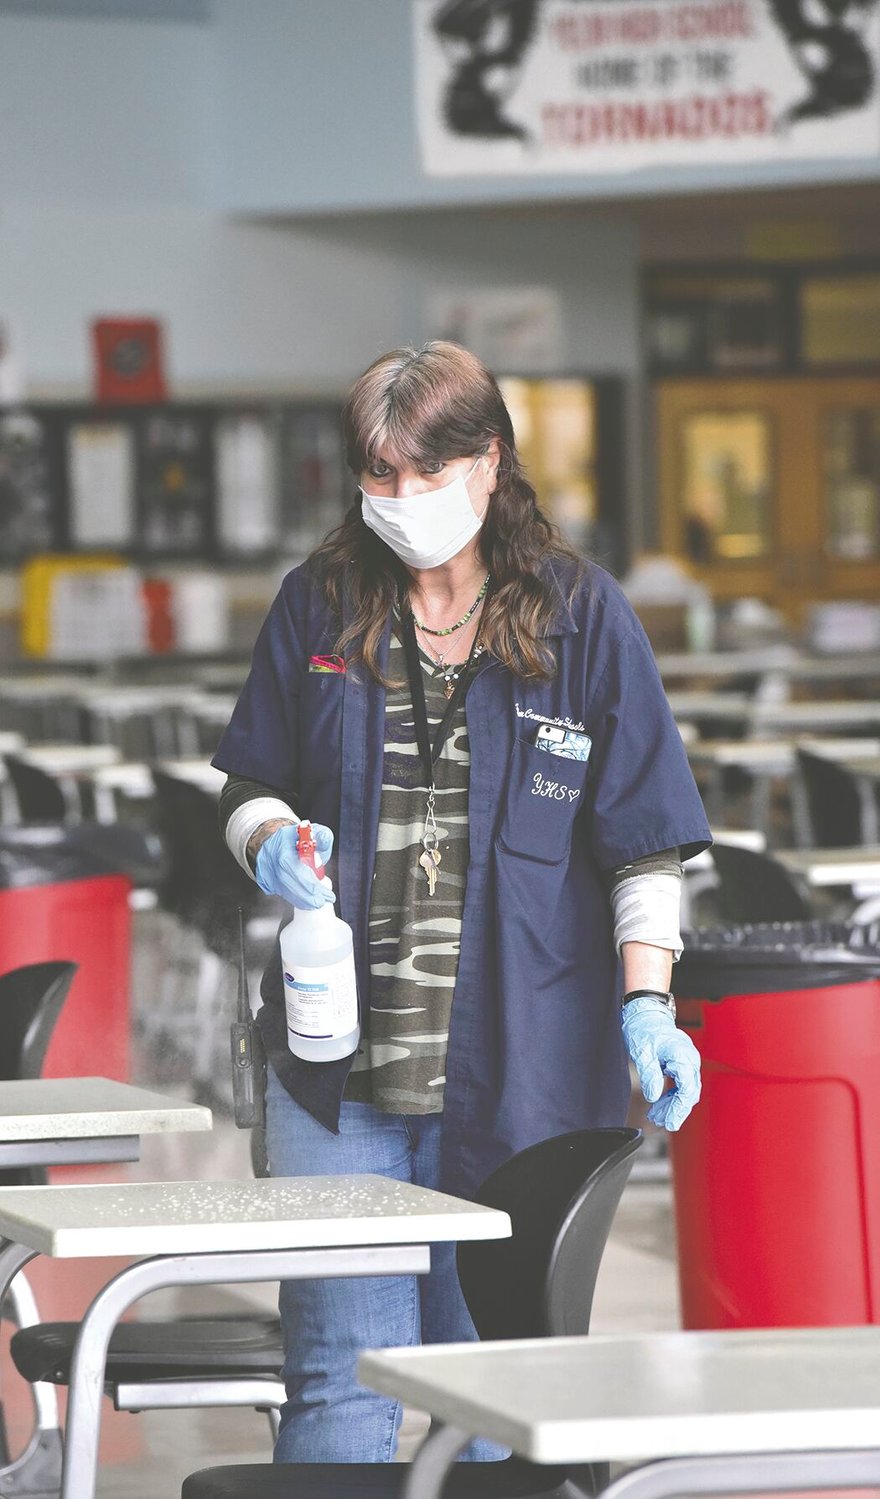 Yelm High School head custodian Janice Giffin, 59, demonstrates how she disinfects and sanitizes tables on Monday, March 8, in the YHS commons where students will eat when they return to school on March 15.